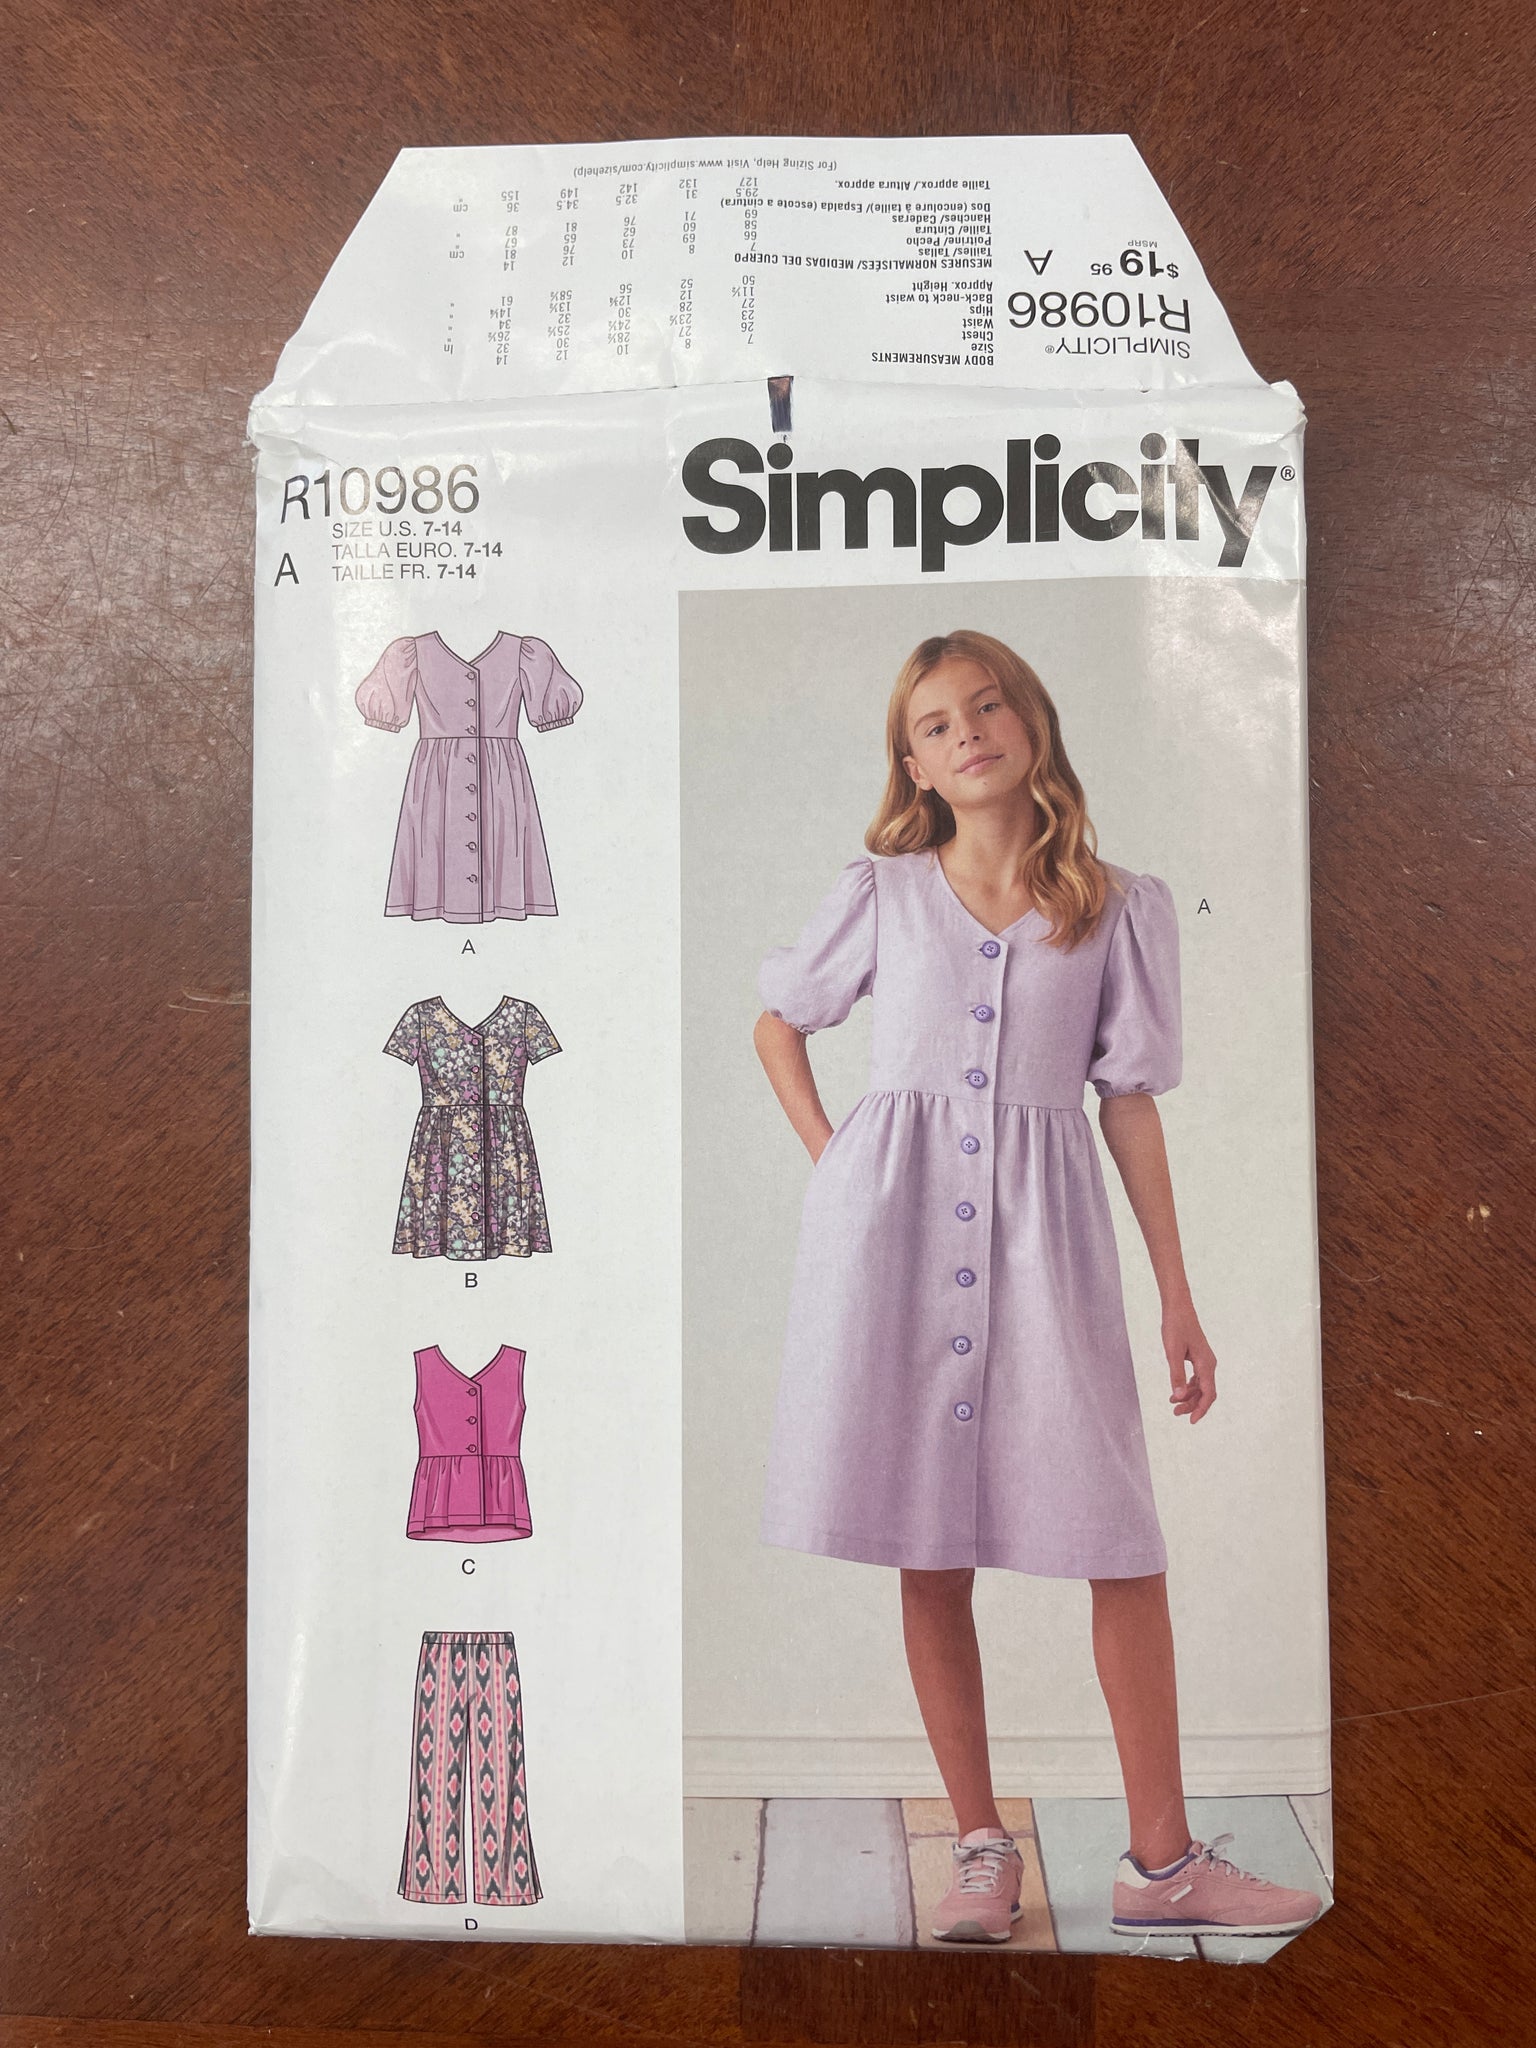 2021 Simplicity 10986 Sewing Pattern - Girl's Dresses and Pants FACTORY FOLDED